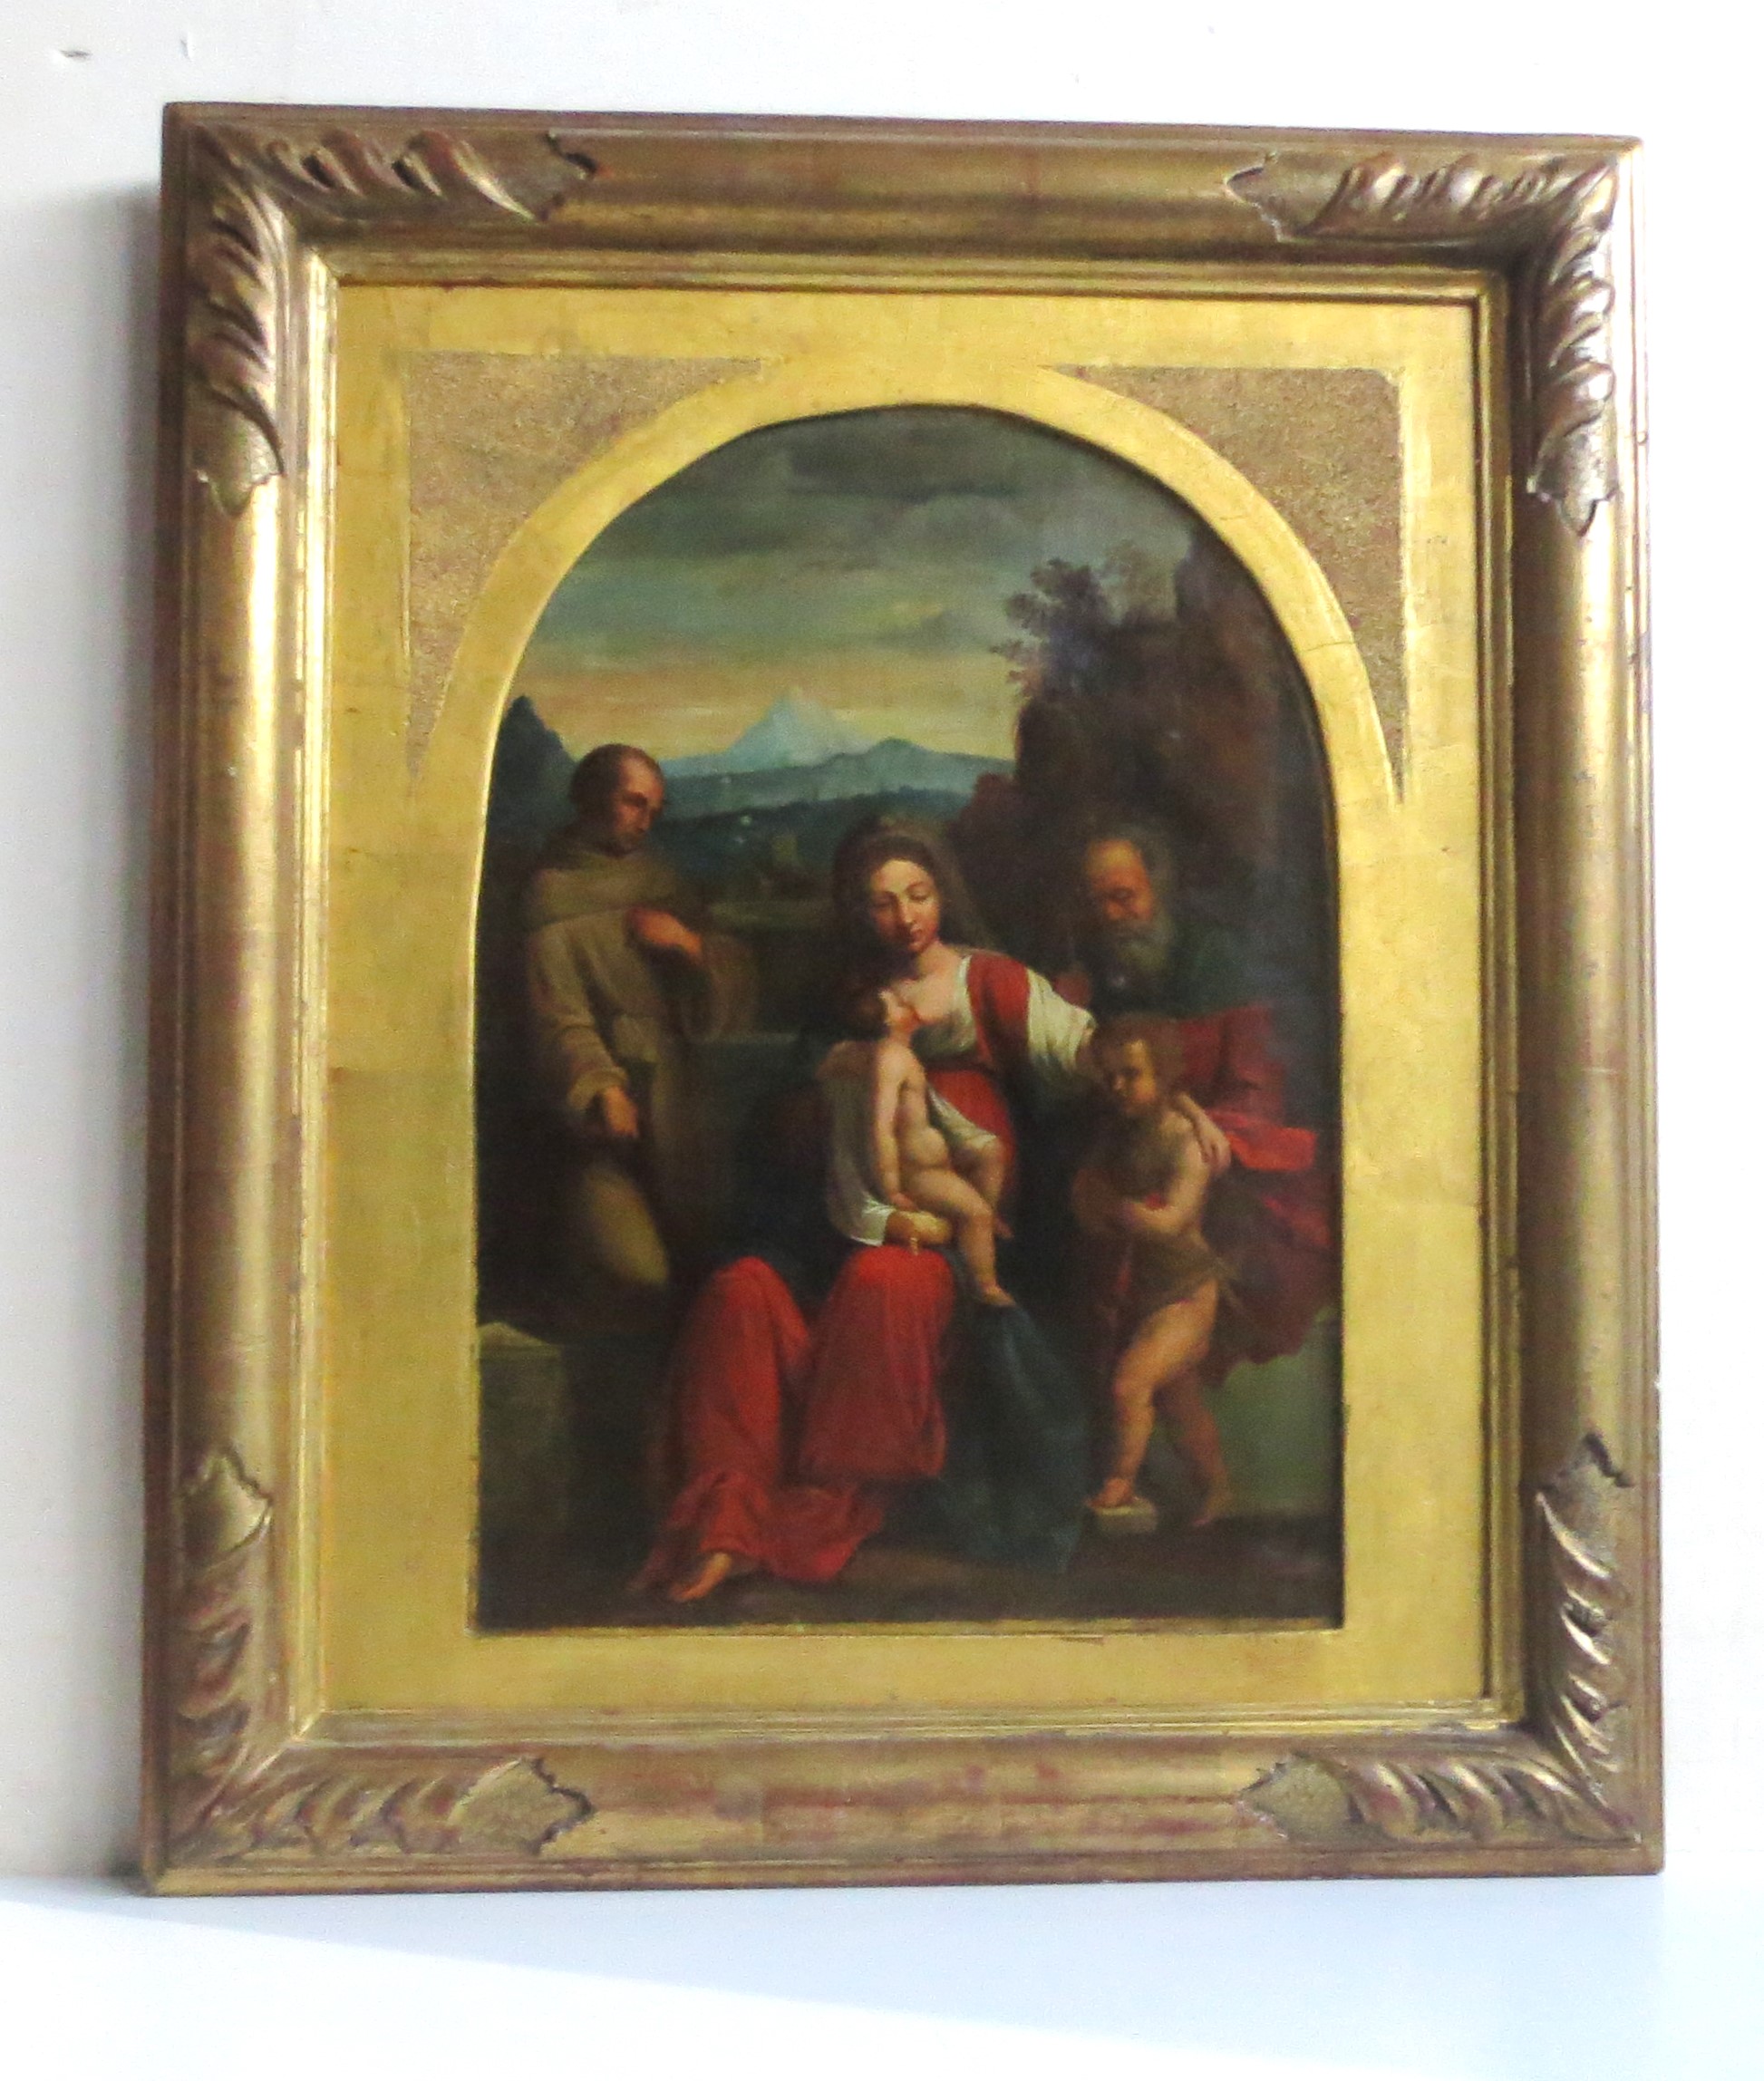 Scarsellino - Sacre Conversazione: Virgin and Child with the Young John the Baptist and St. Anthony